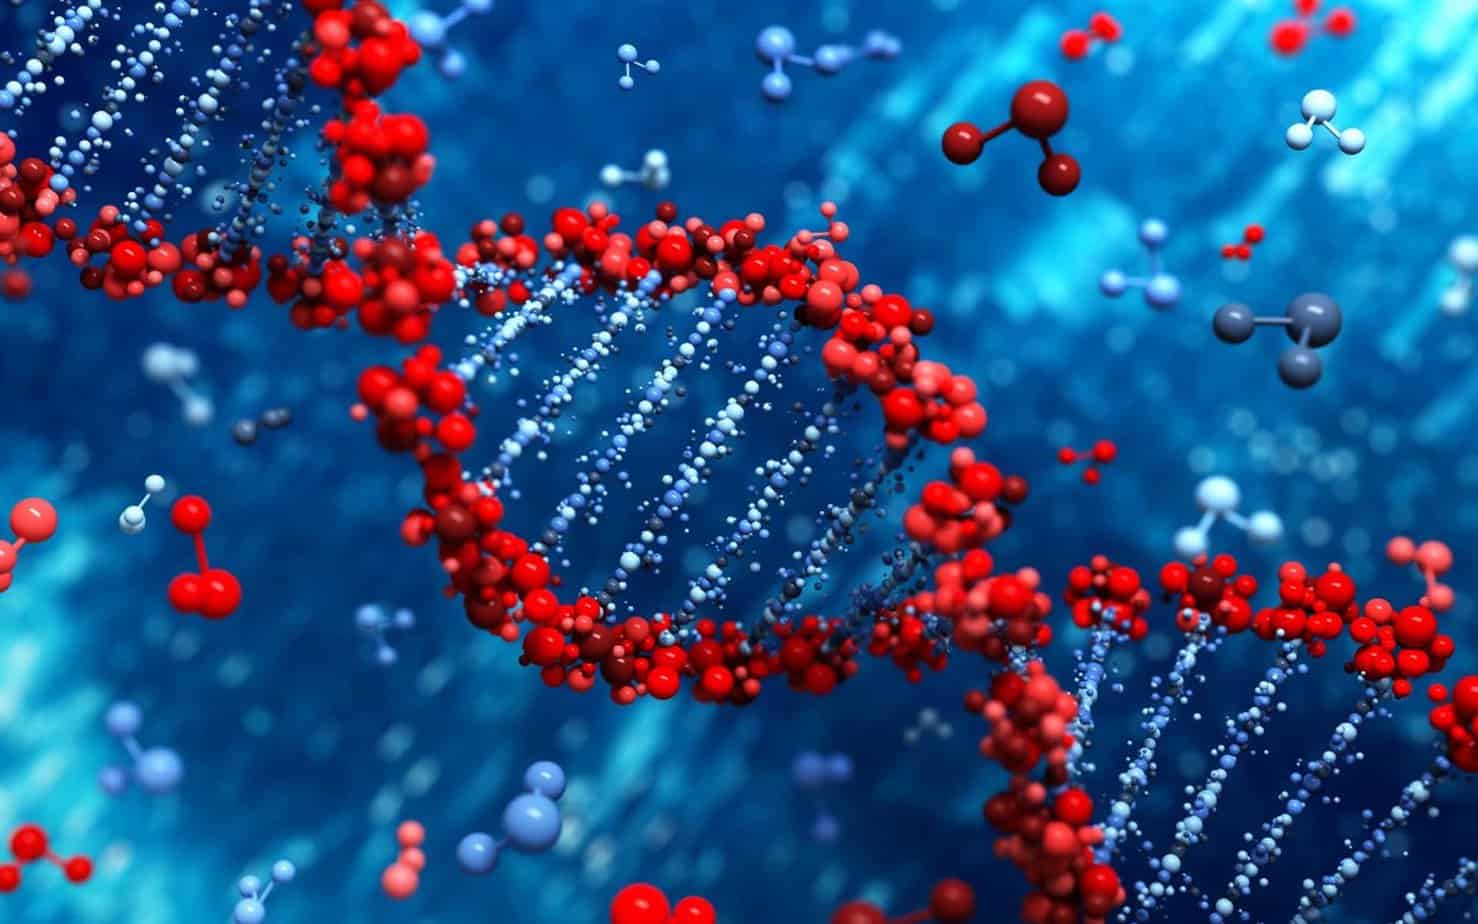 What Can Your DNA Tell You About Your Health?